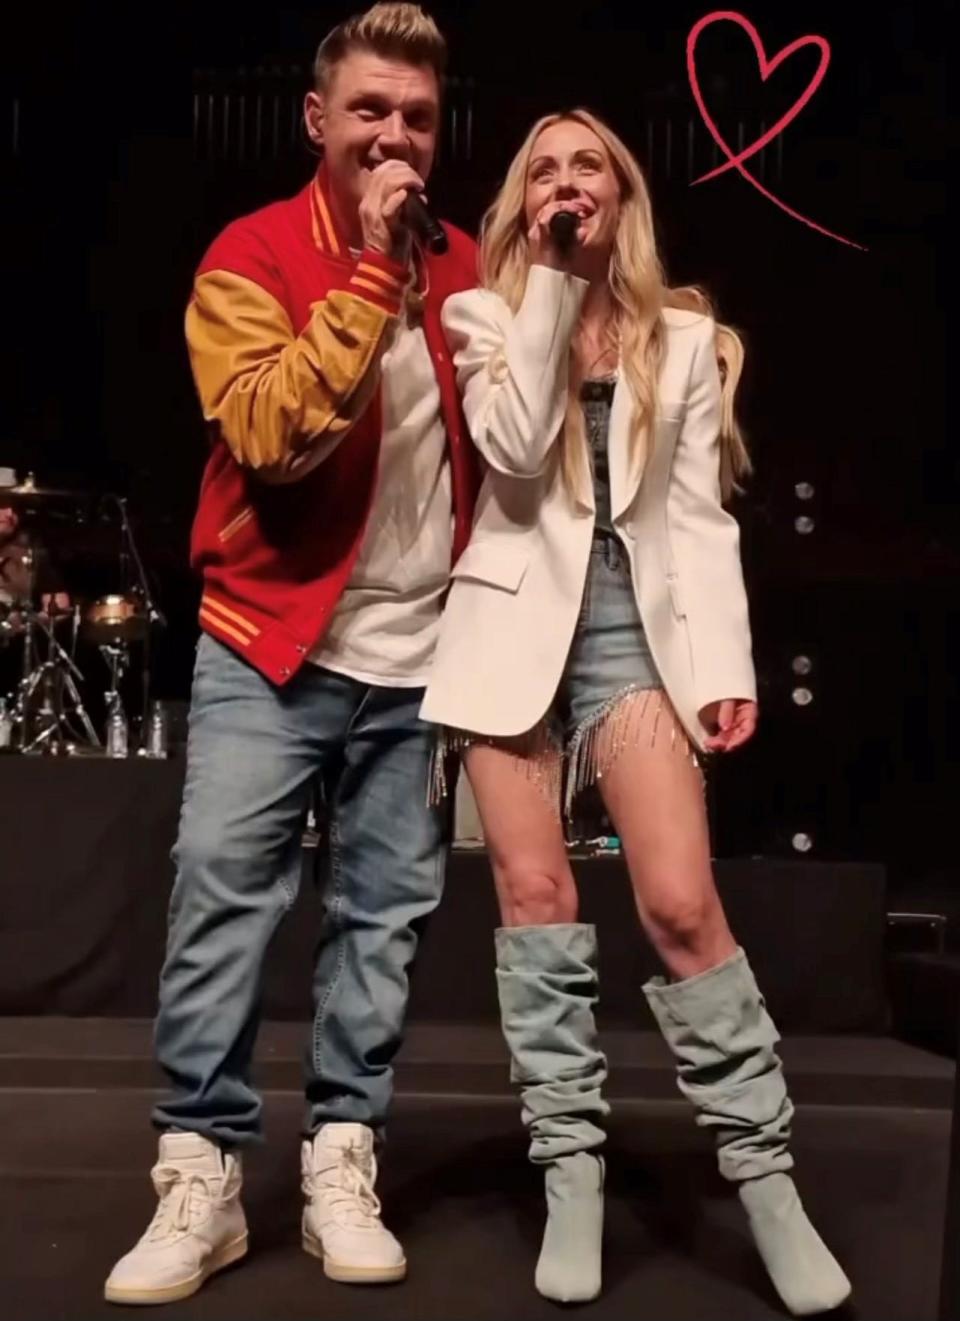 Former Backstreet Boy Nick Carter and 'The Bachelor' franchise star Carly Waddell sing together Oct. 7, 2023, at the Schermerhorn Symphony Center in Nashville at a Carter concert there that night. Waddell, an aspiring singer/songwriter in Nashville now, says she'll open all Carter's dates this year